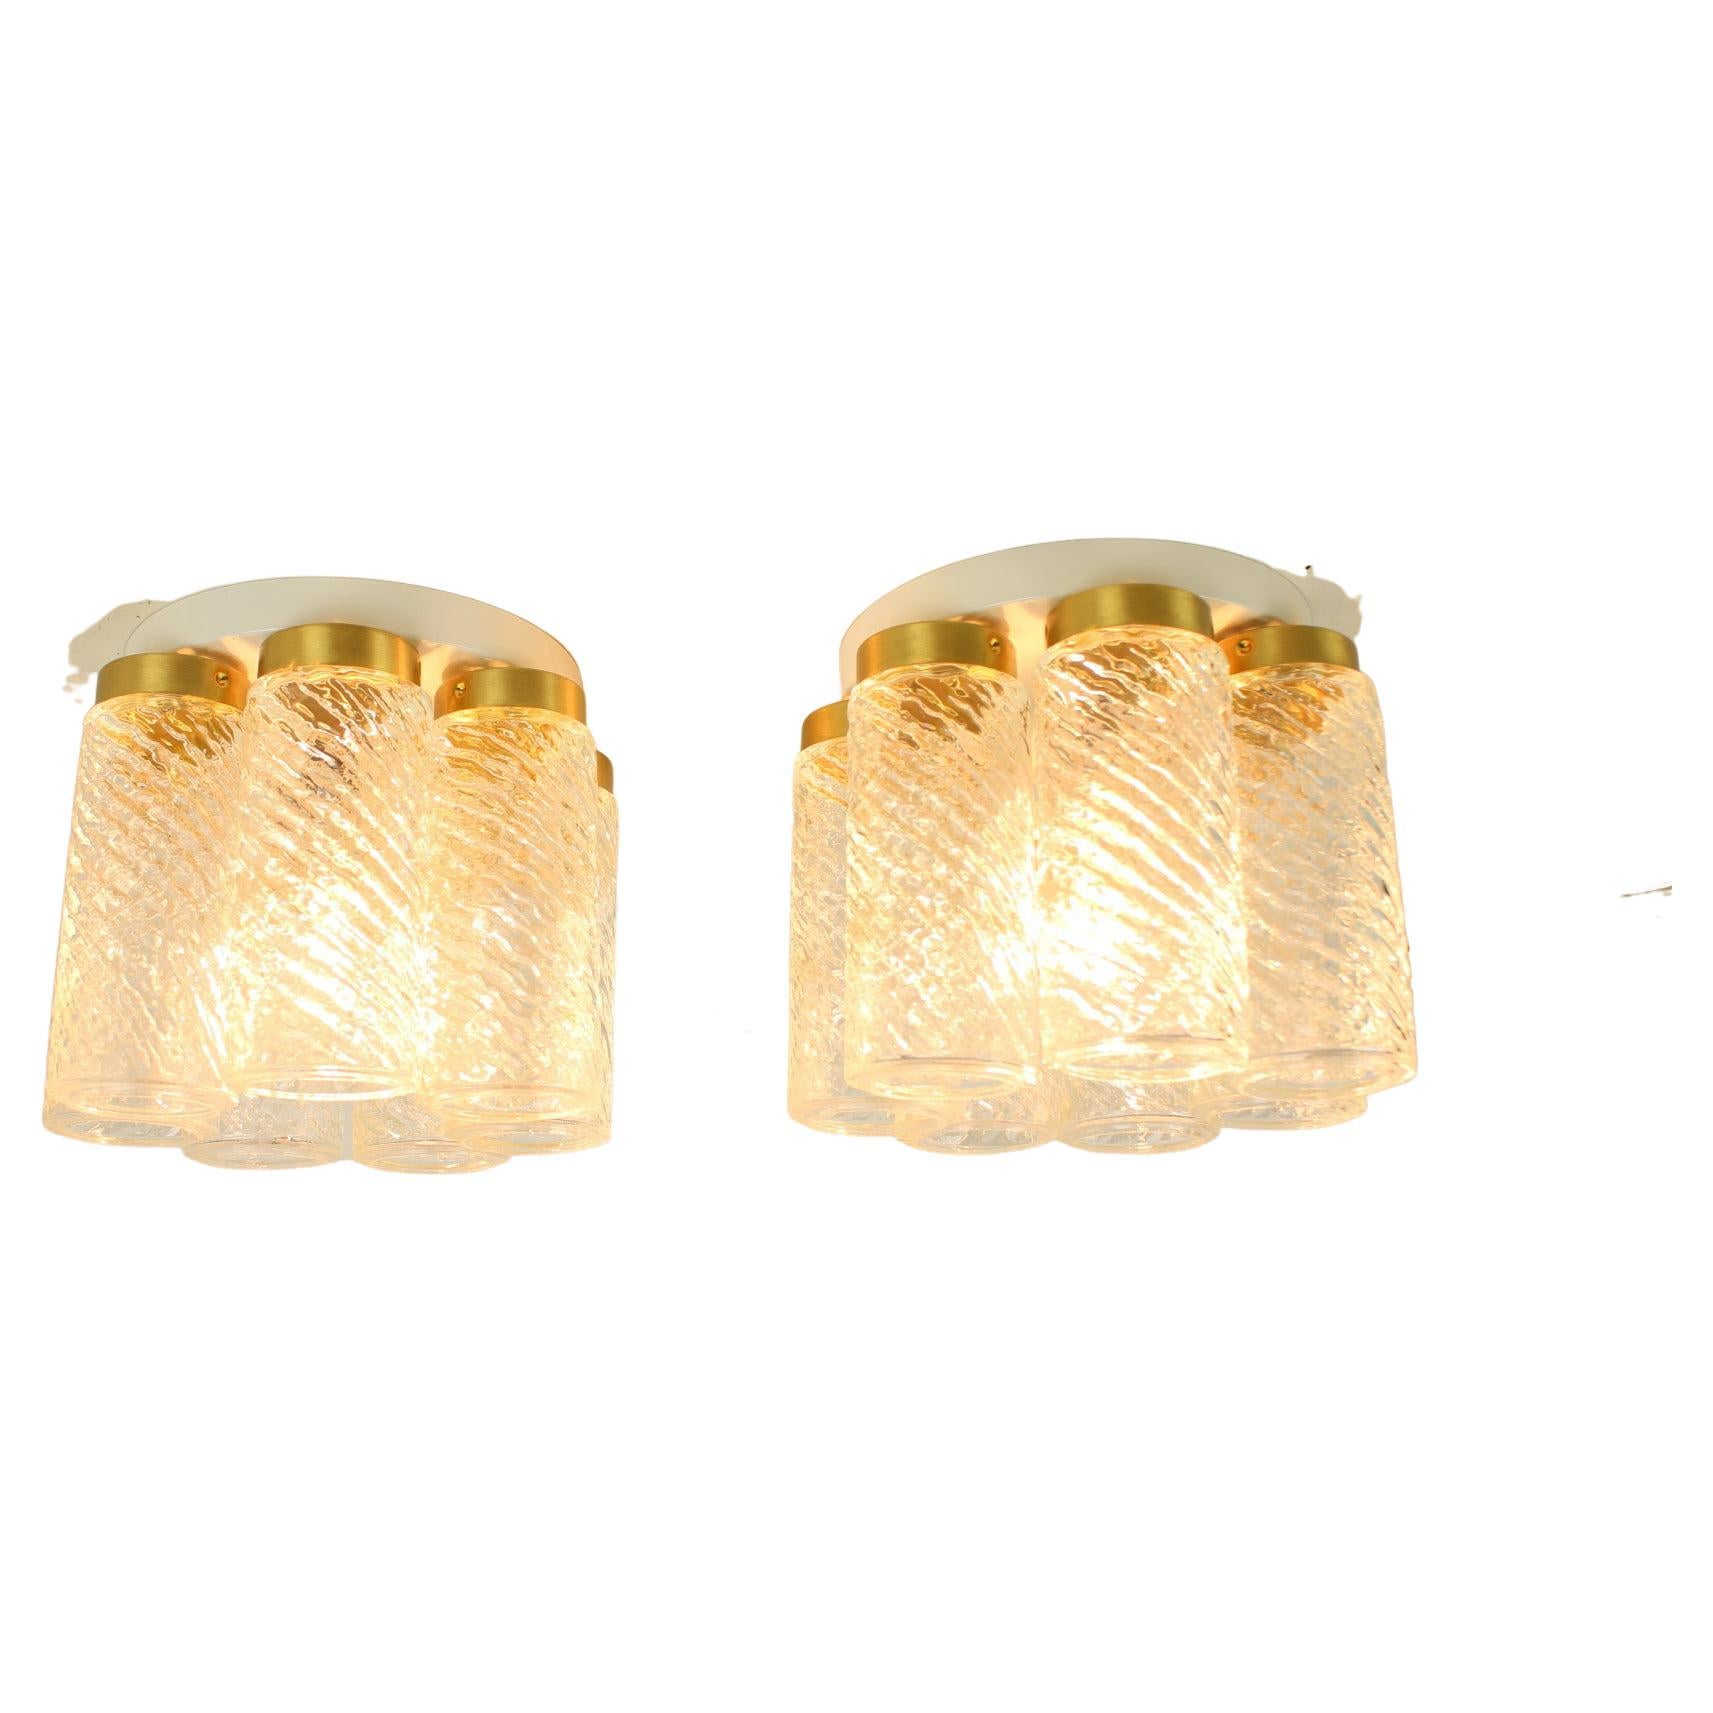 Pair of Midcentury Ceiling Lamps, Napako, 1970s For Sale